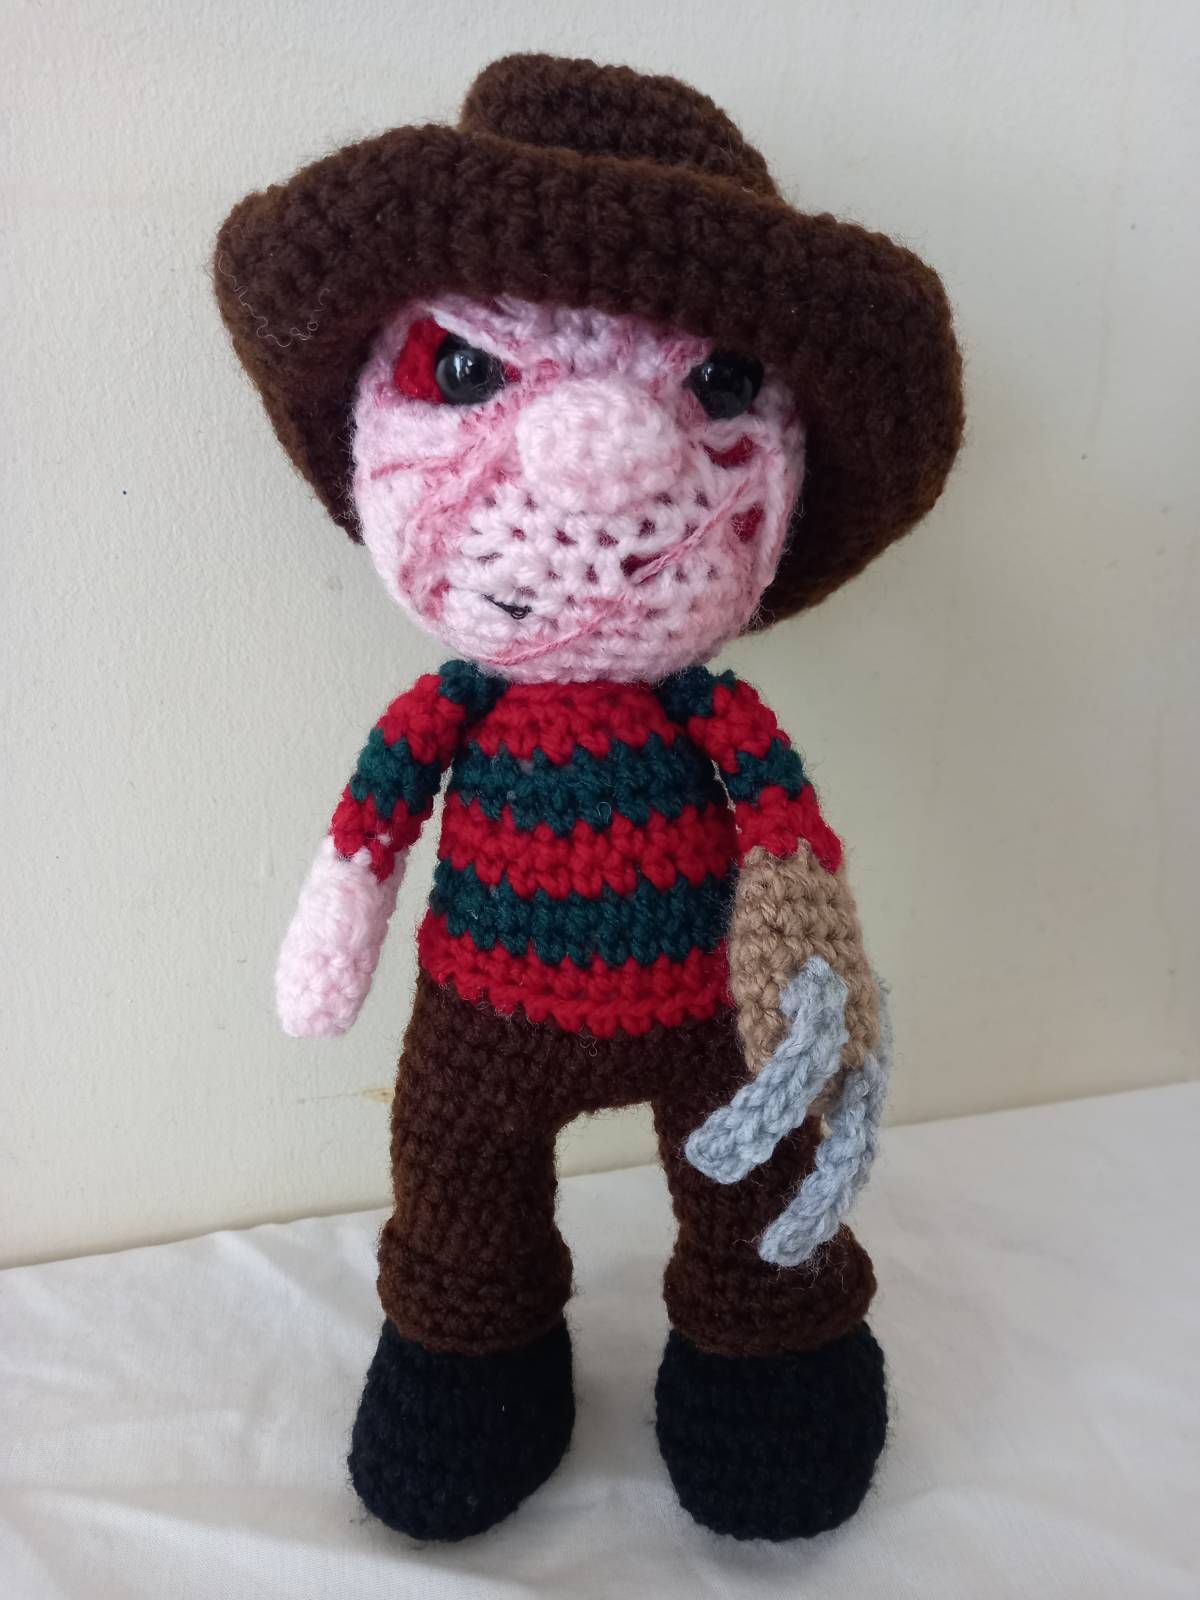 Crochet Freddy Krueger Pattern Amigurumi Review by Kerry Oakes for Cottontail Whiskers